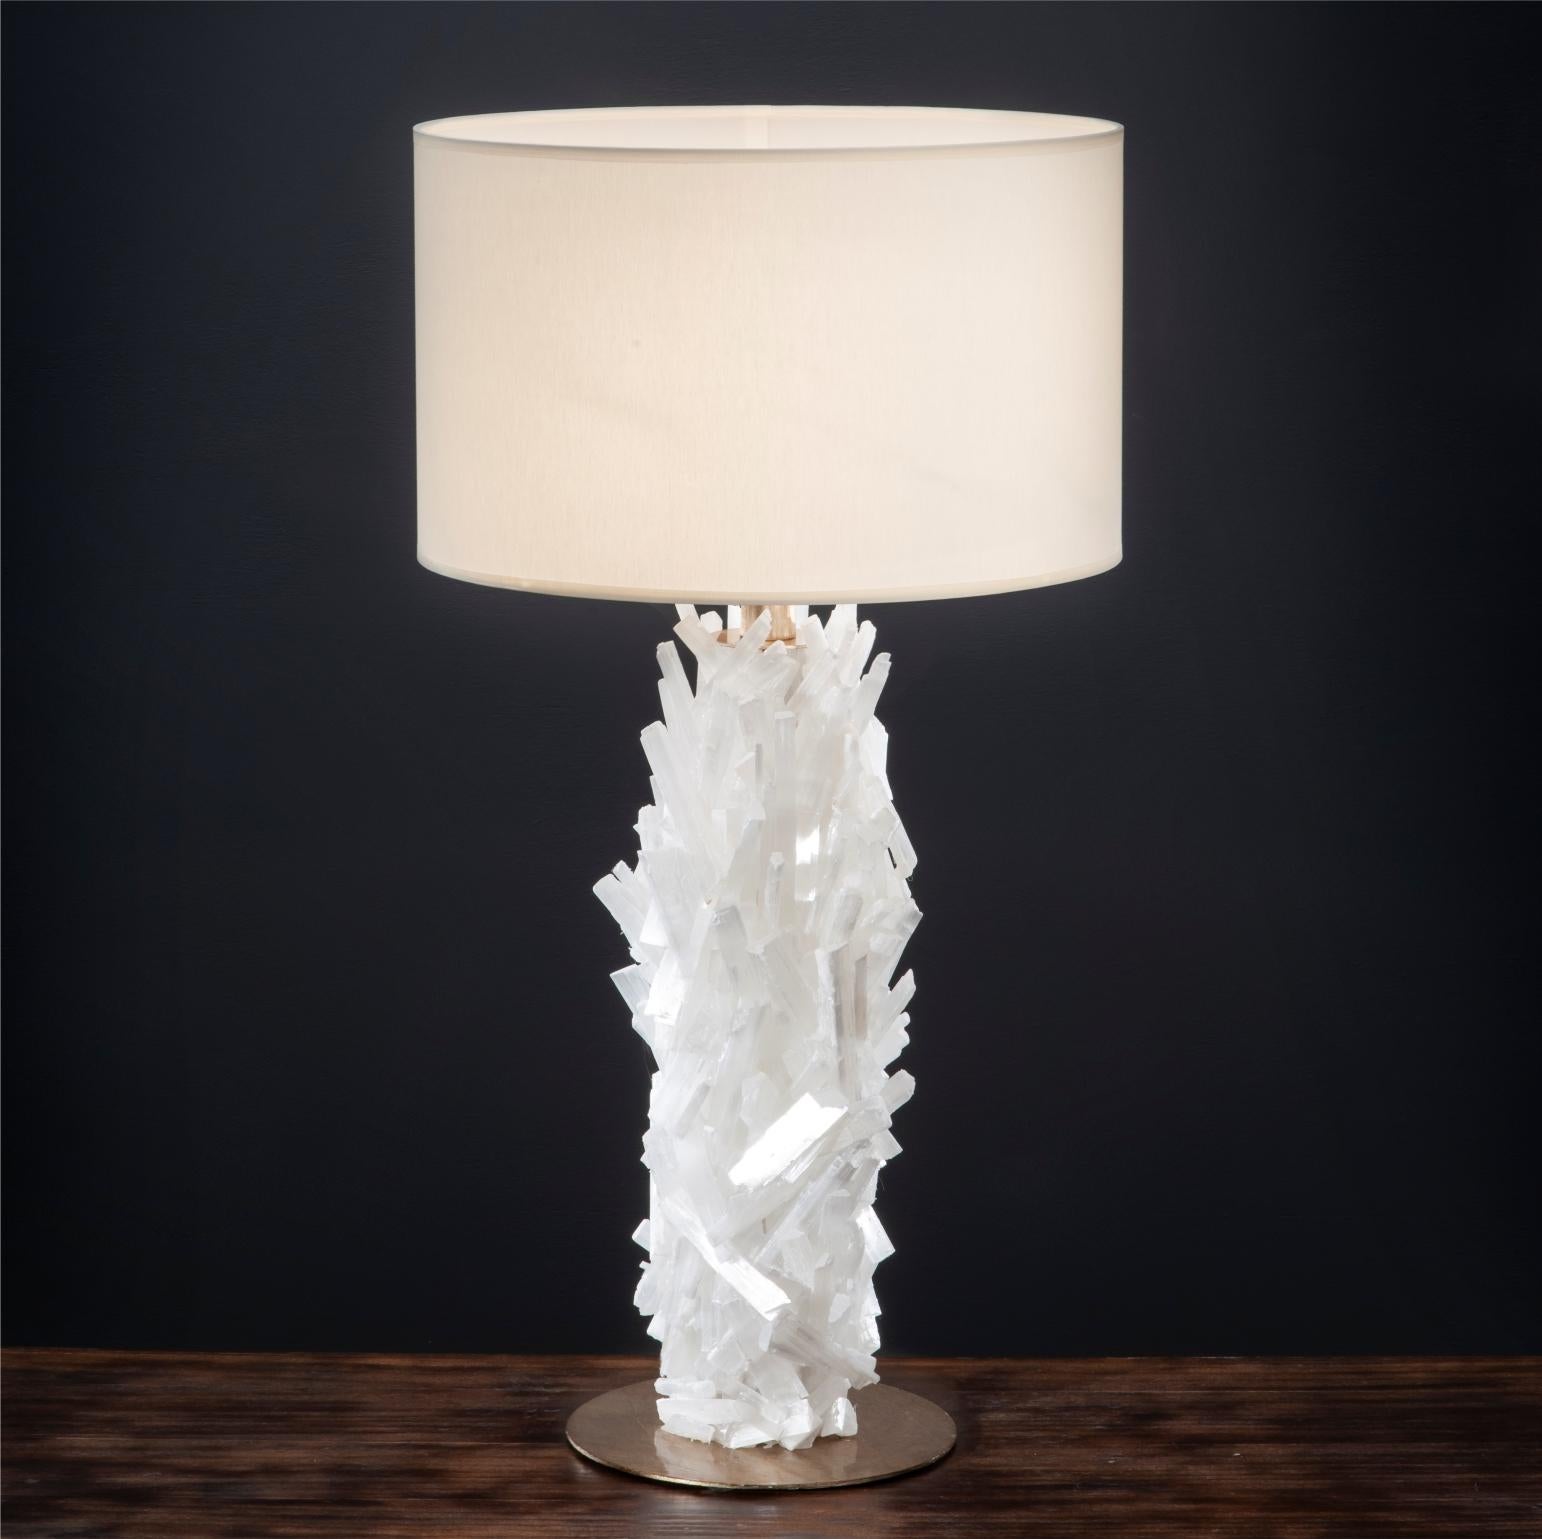 Natural stone table lamp by Aver
Dimensions: D 40 x H 85 cm
Materials: Natural stone, metal.

All our lamps can be wired according to each country. If sold to the USA it will be wired for the USA for instance.